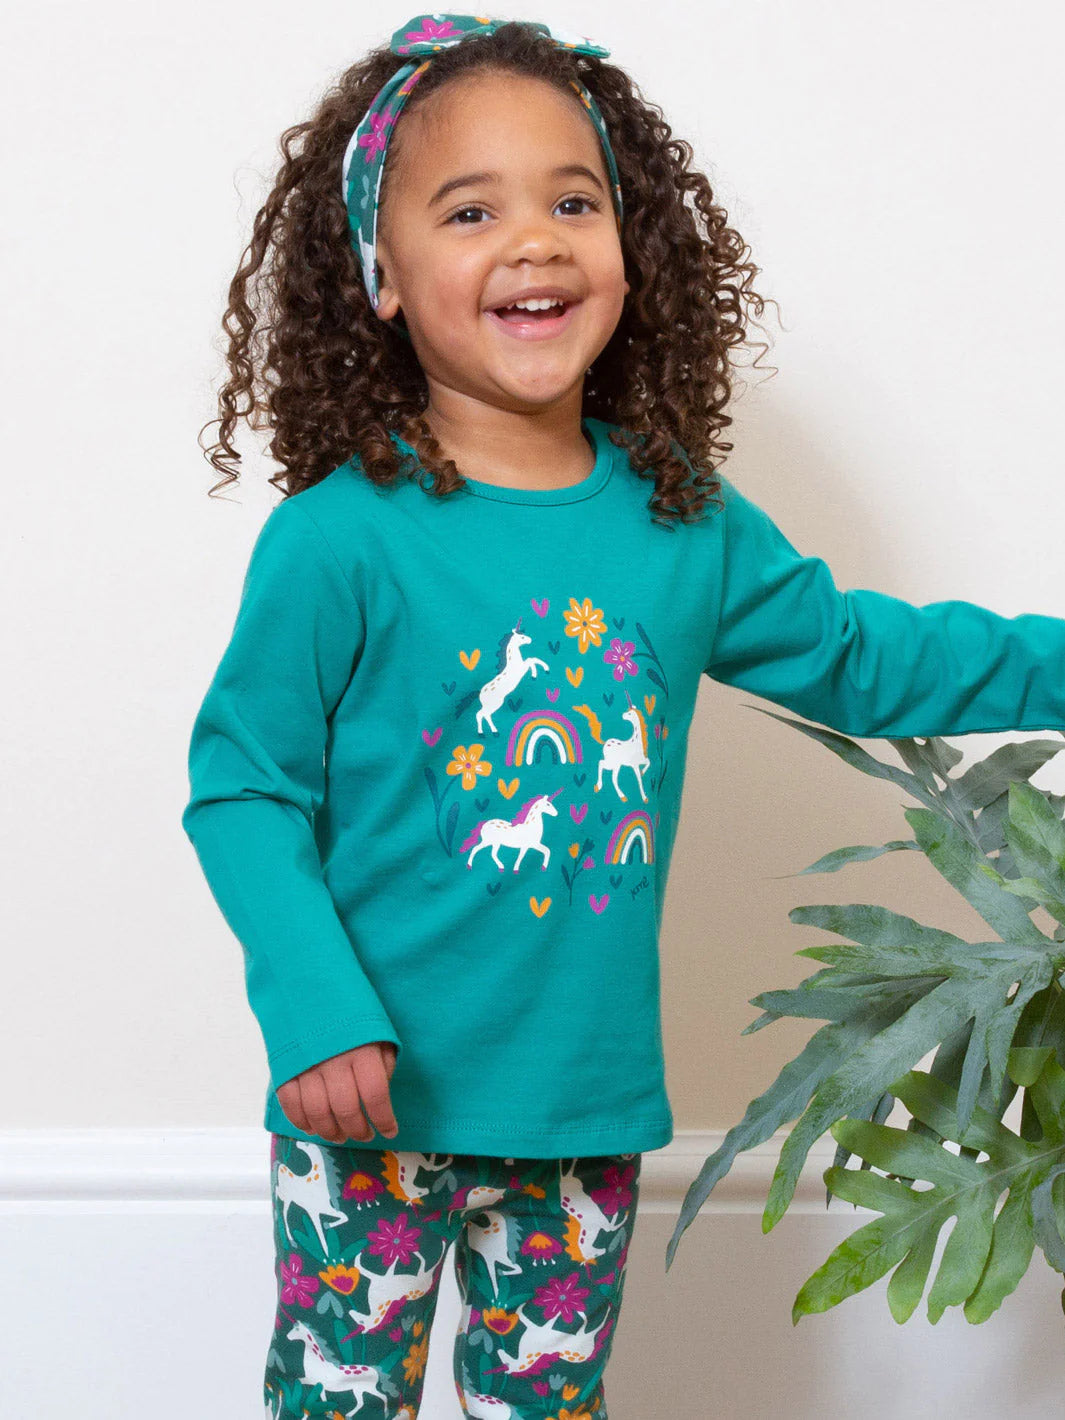 Kite Magical Forest Long Sleeve T-shirt